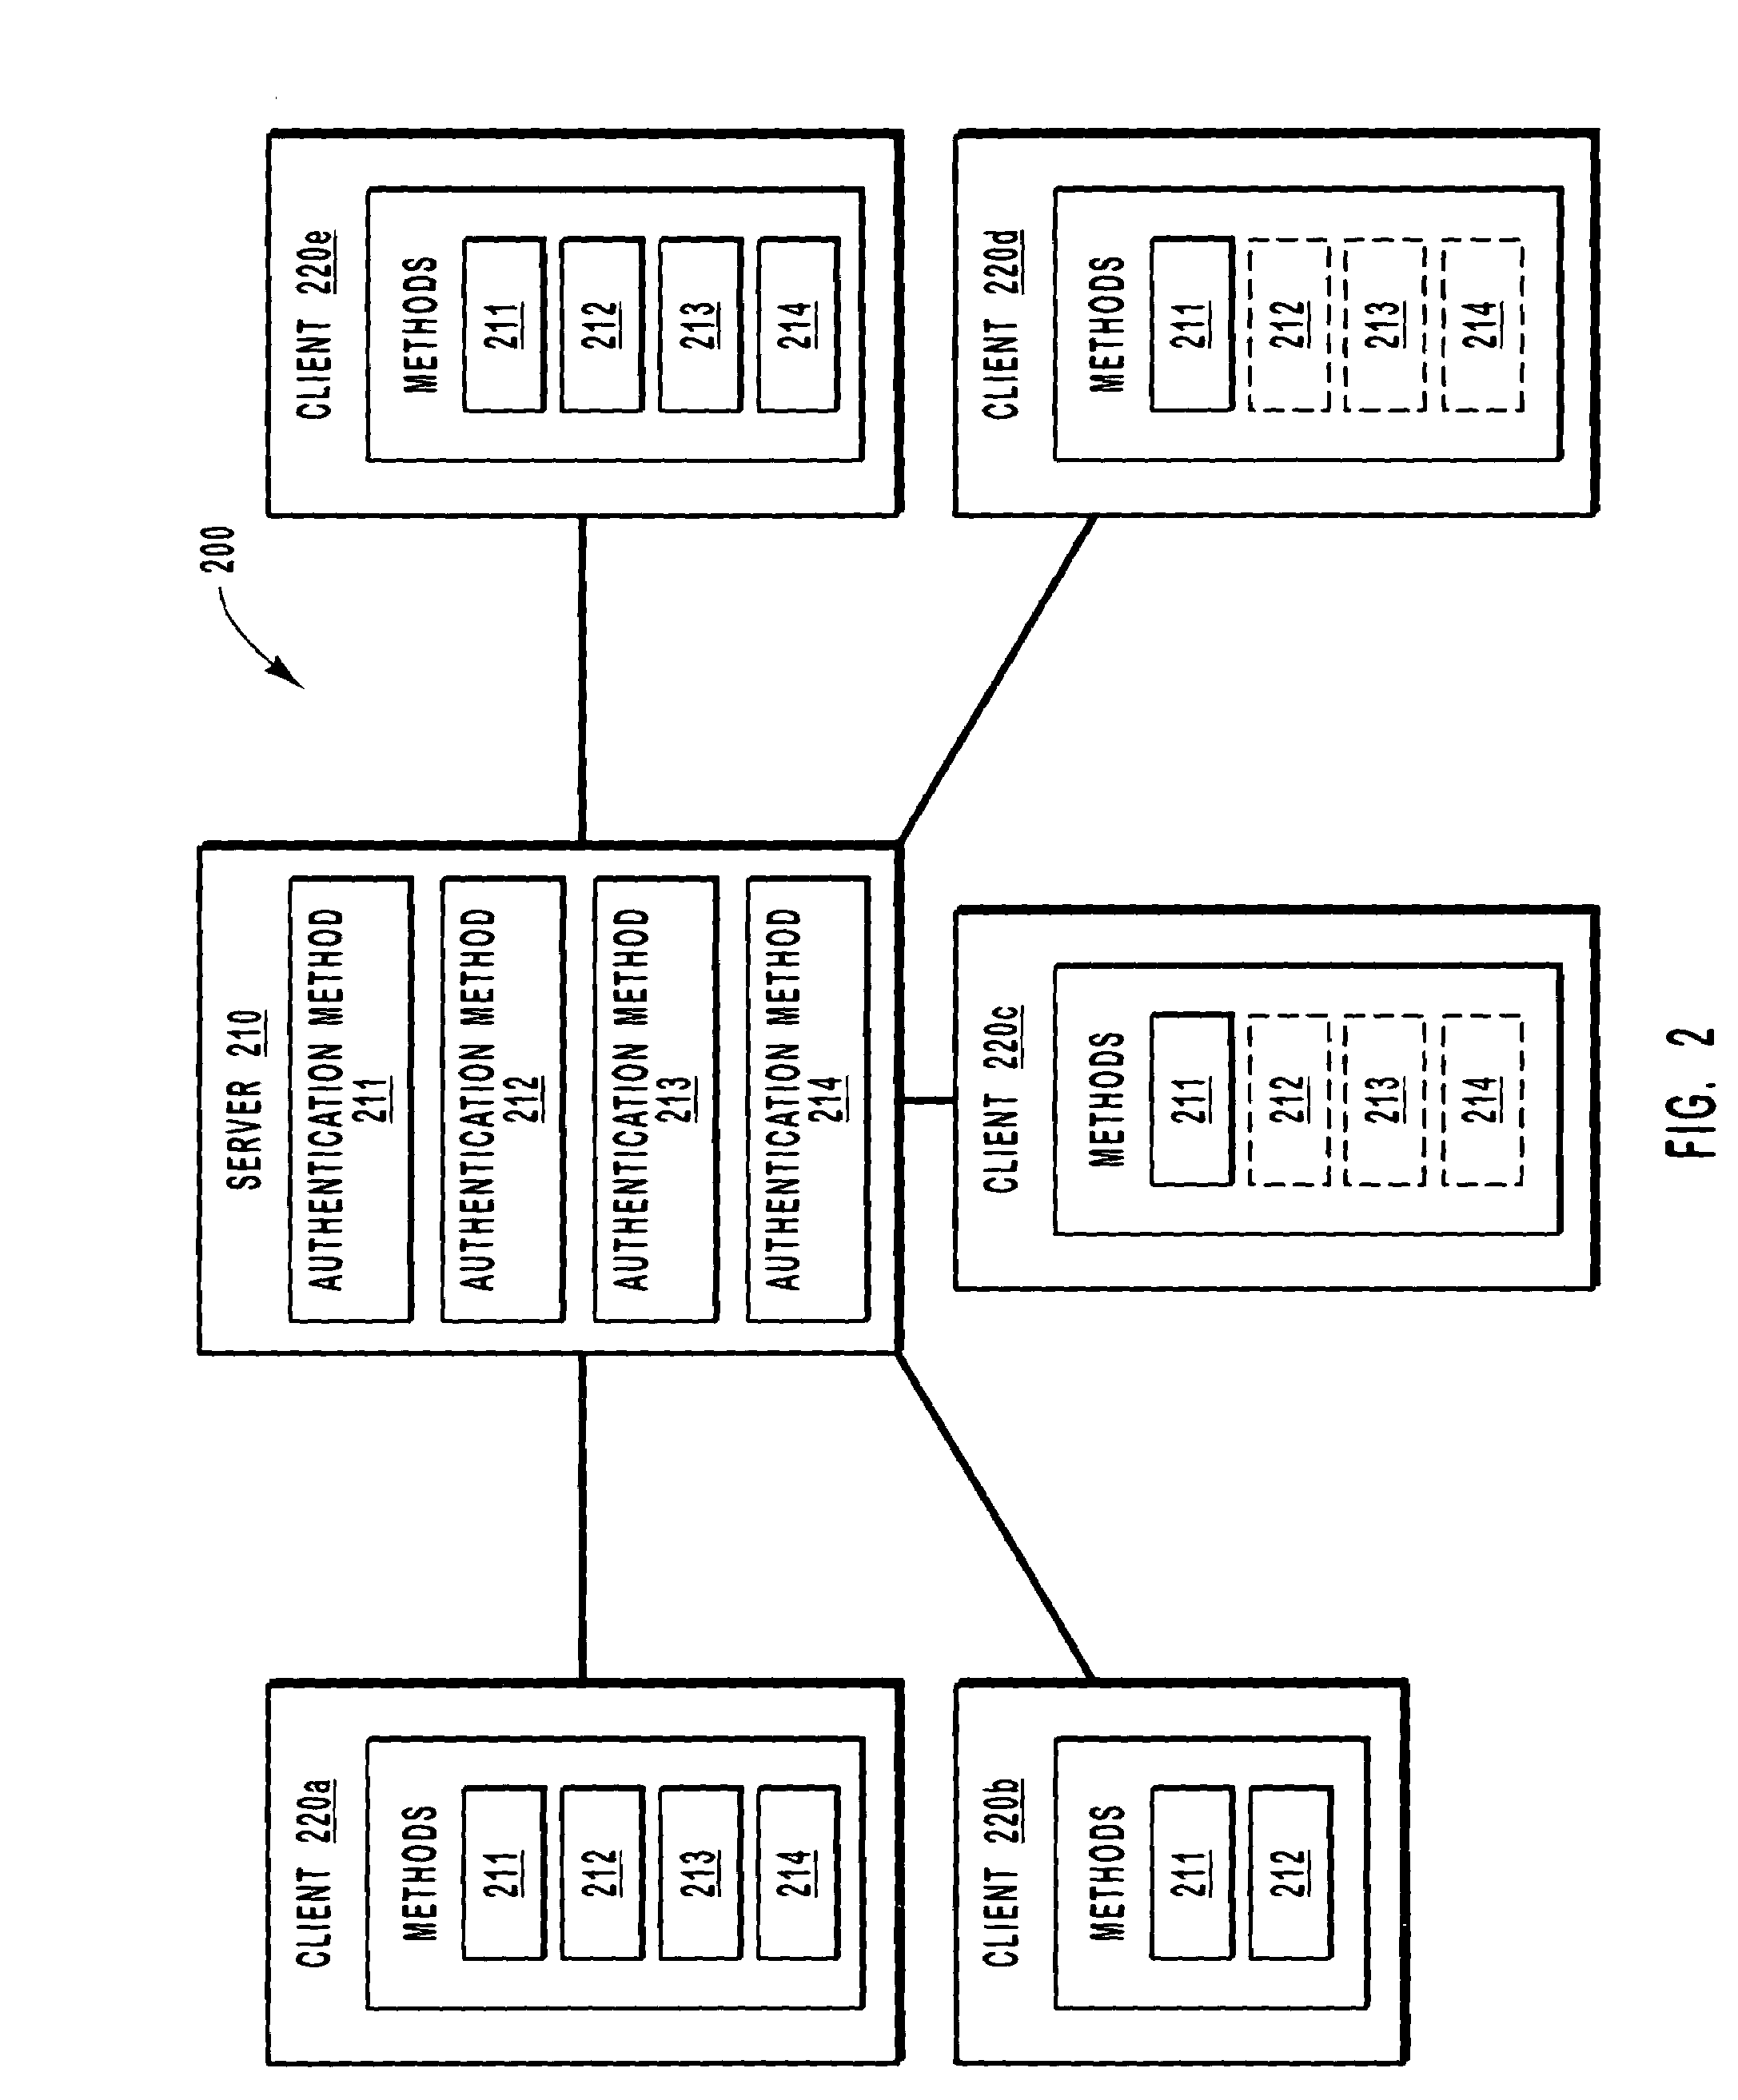 Methods and systems for selecting methodology for authenticating computer systems on a per computer system or per user basis